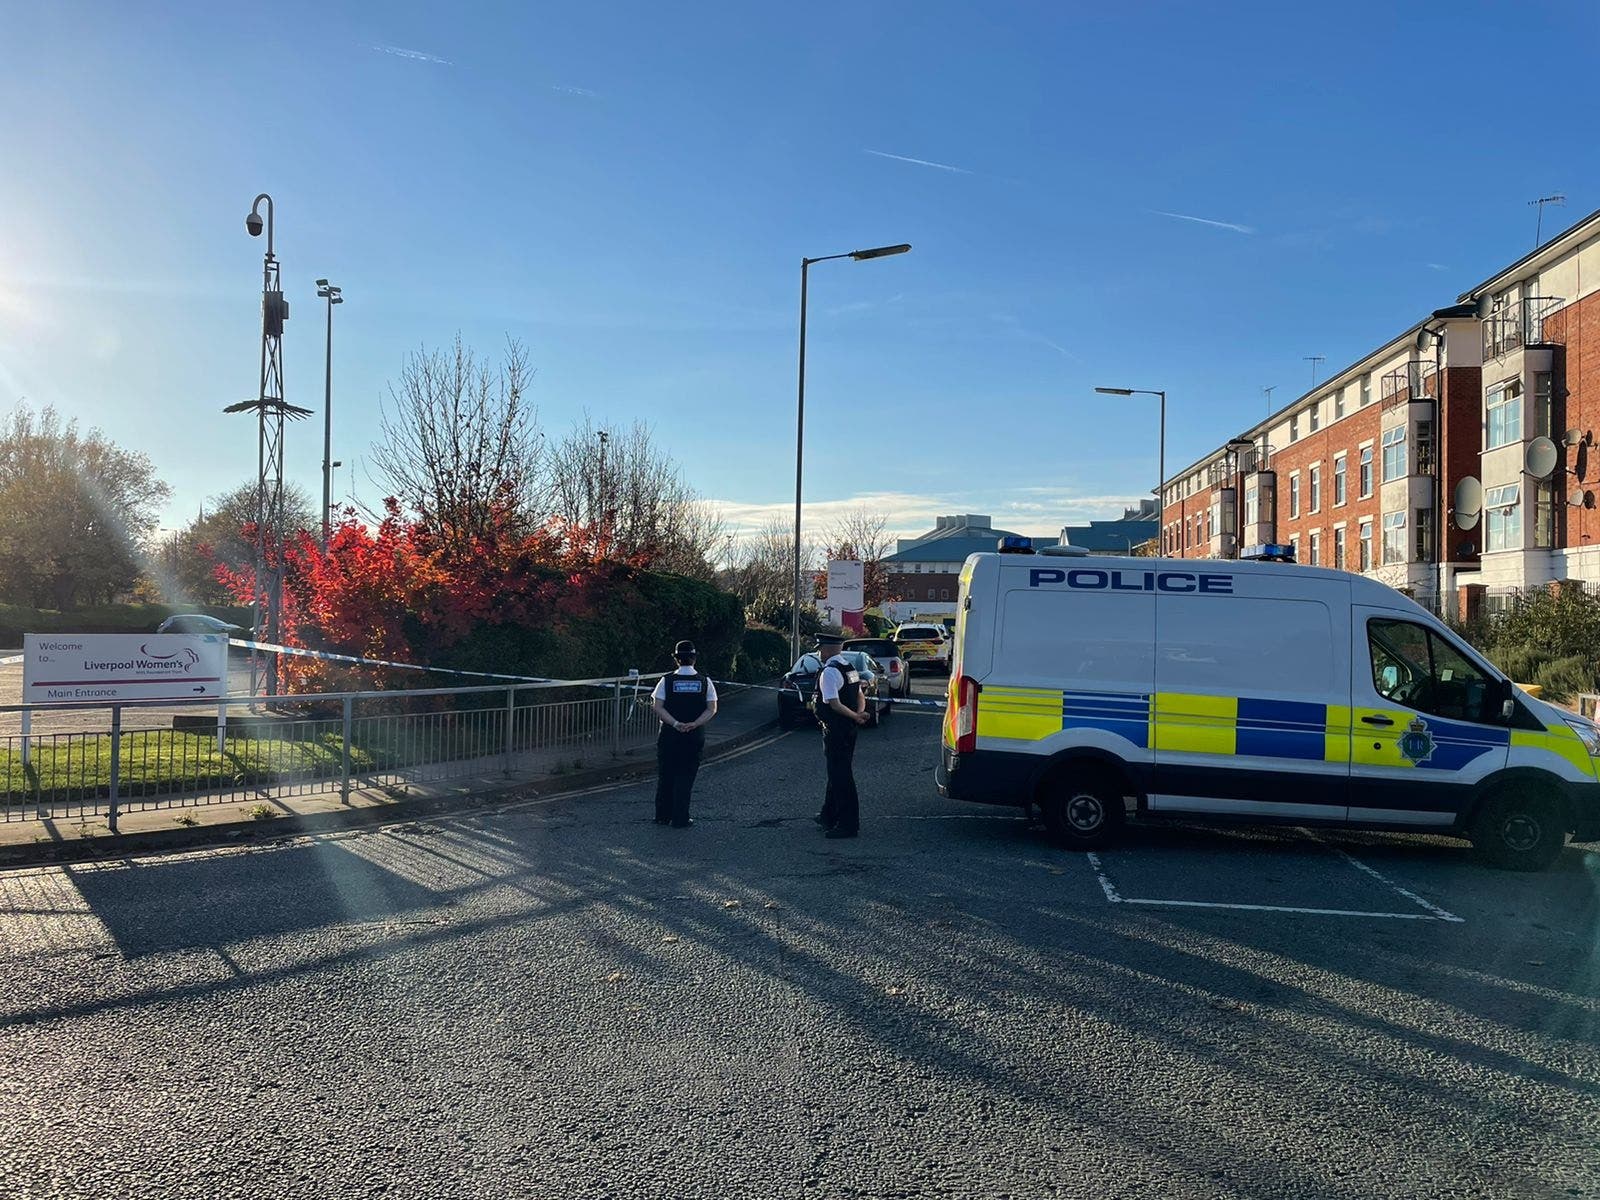 Police at the site of the explosion of a 'auto in Liverpool